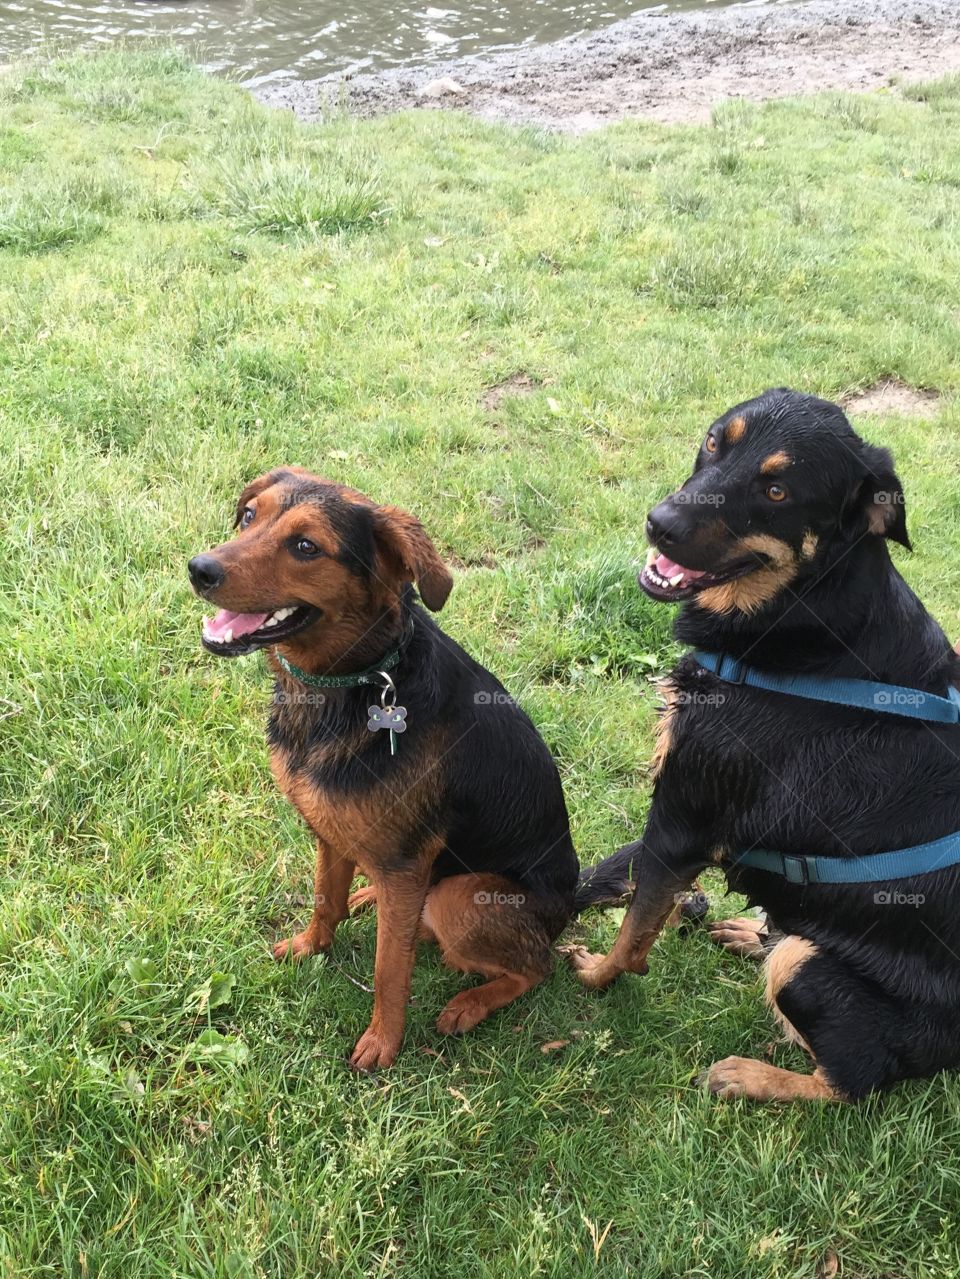 Breslin and Jake were separated at birth and adopted by two different families at the humane society. We were the ones who adopted Jake and found Breslin through research and let them have a play date! They hadn't seen each other in a year and had so much fun playing in the lake. 